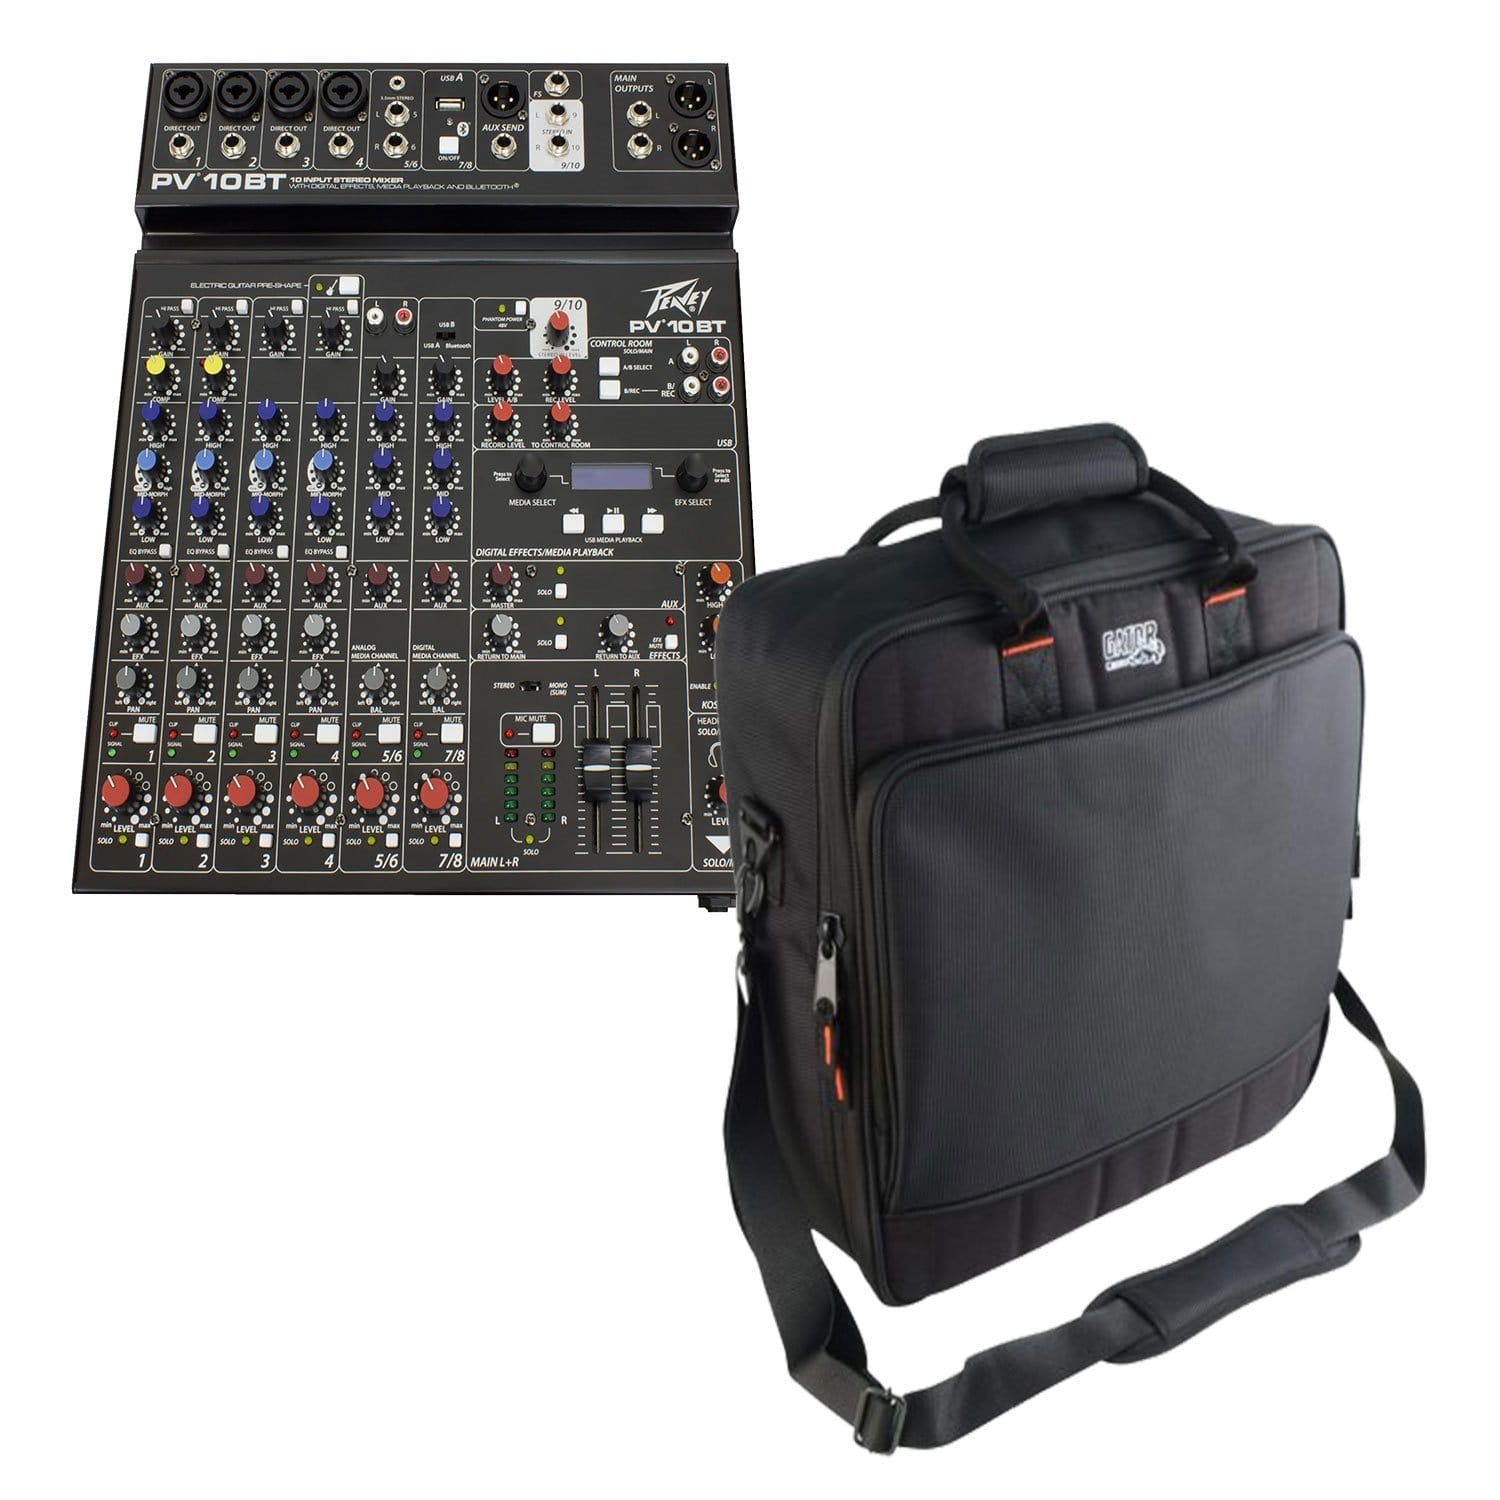 Peavey　with　Bluetooth　8-Channel　Mixer　10BT　PV　Gator　Stage　ProSound　Bag　and　PSSL　Lighting